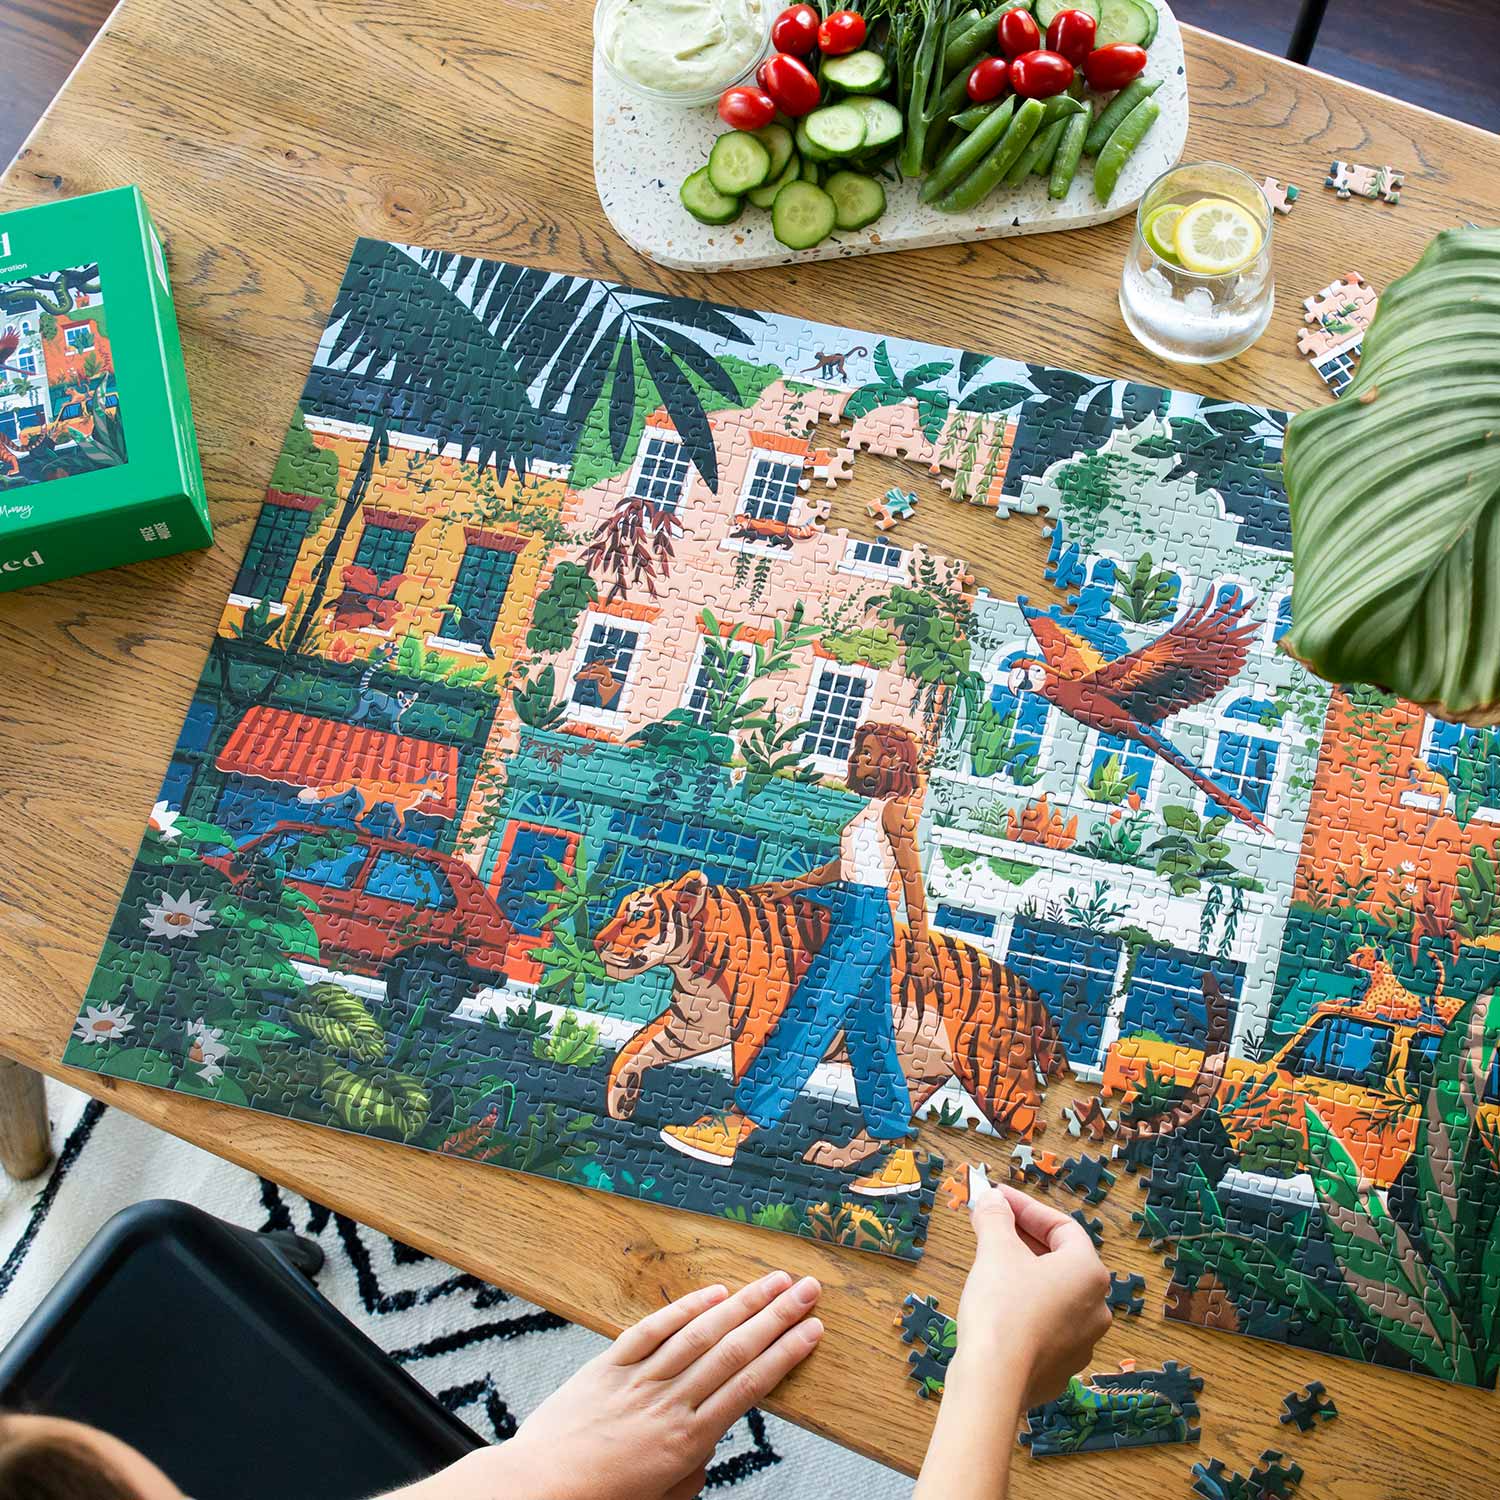 Why Jigsaw Puzzles Are the Ultimate Screen-Free Activity